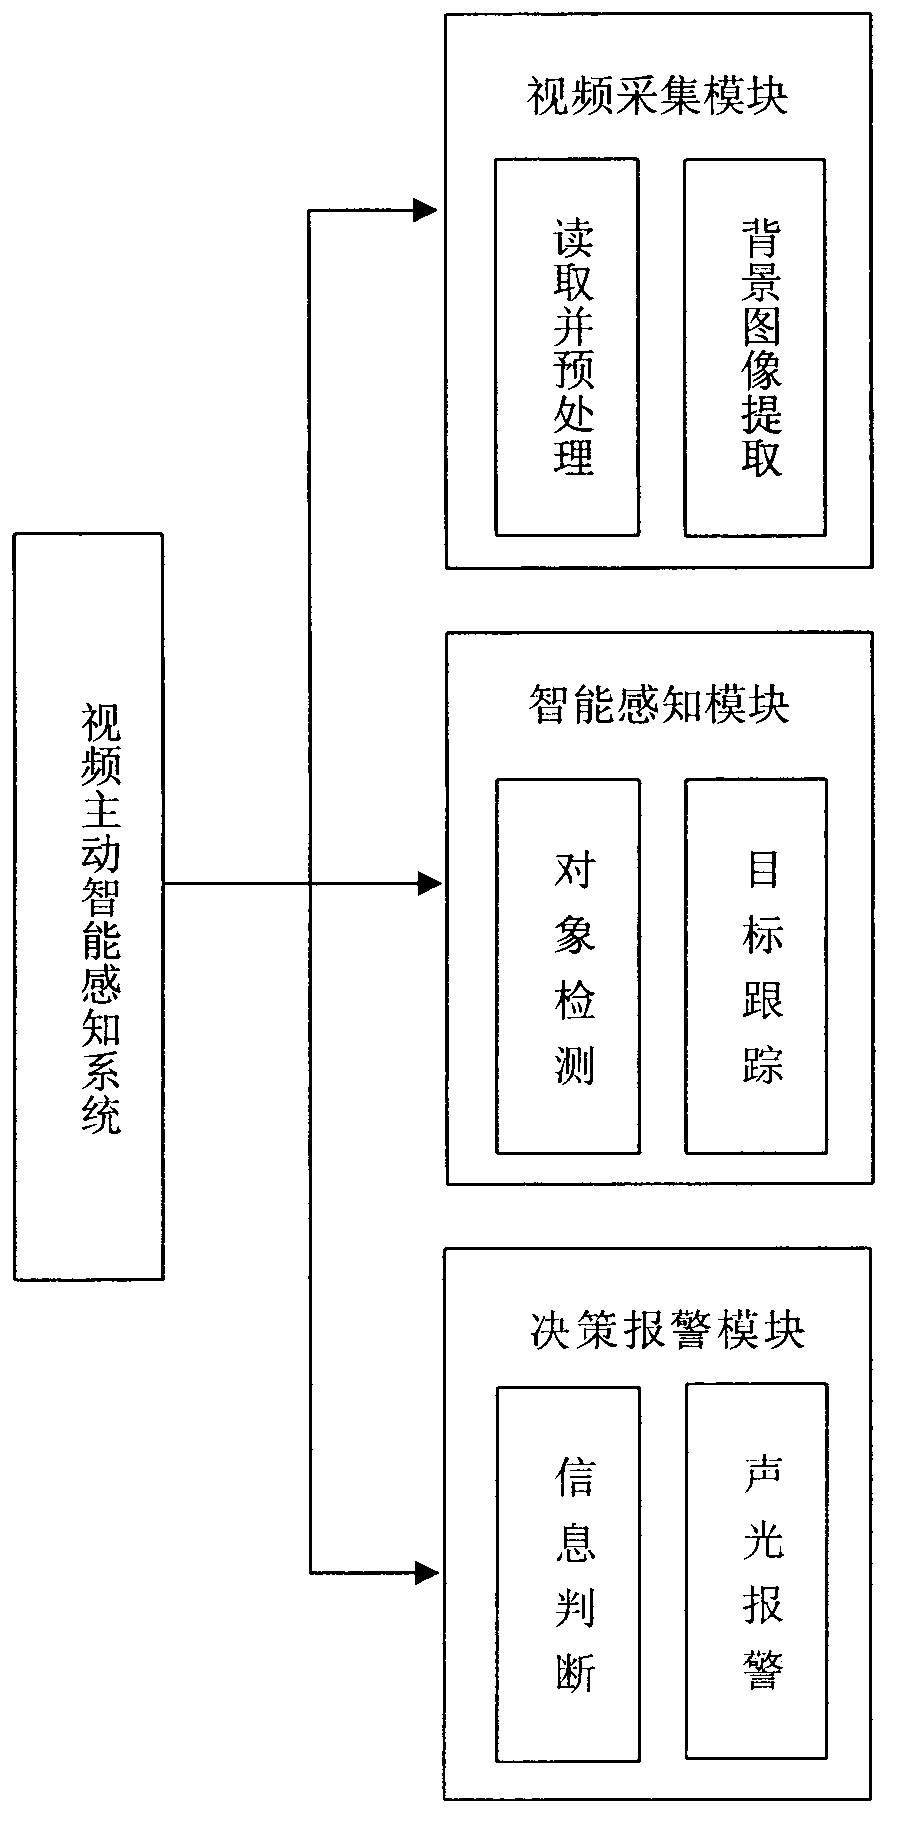 Method and system for video driving intelligent perception and facing safe city